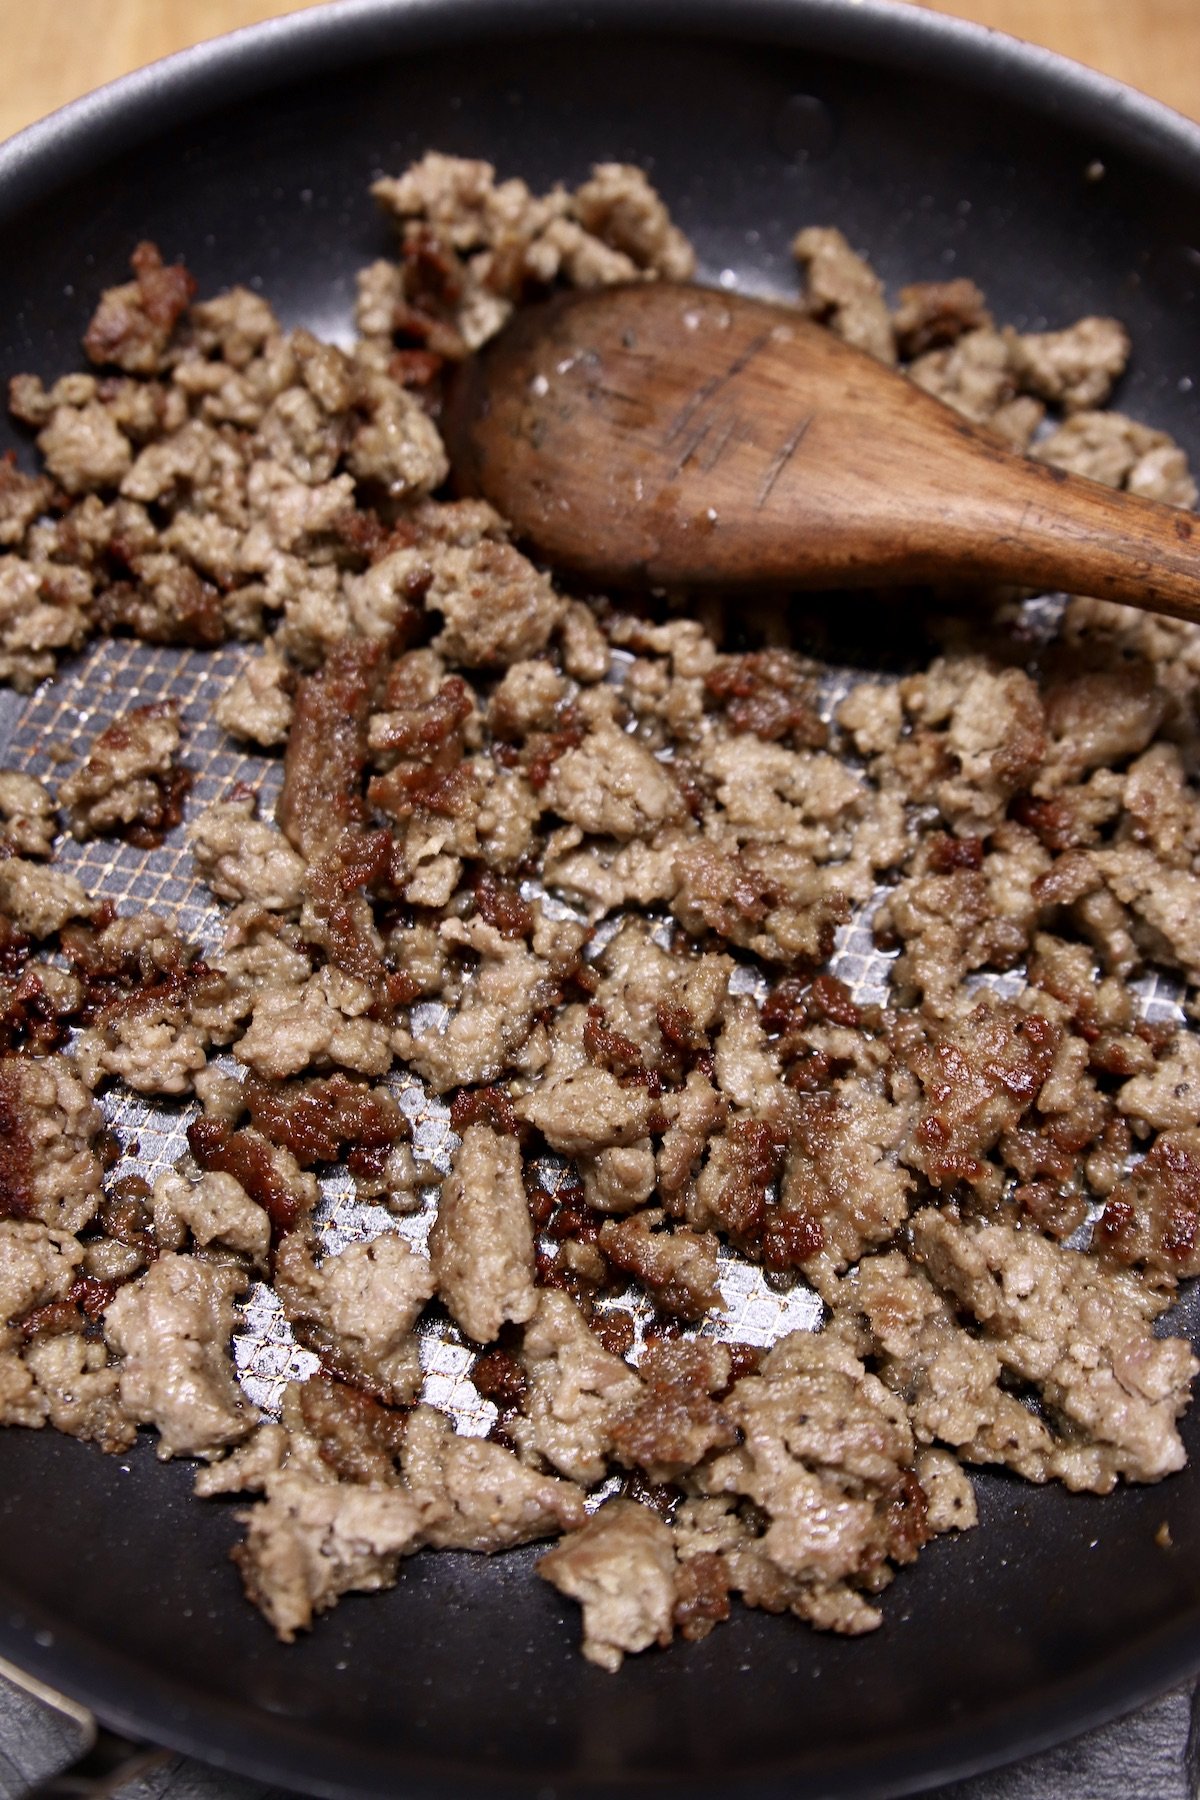 cooked ground sausage in a skillet with wooden spoon